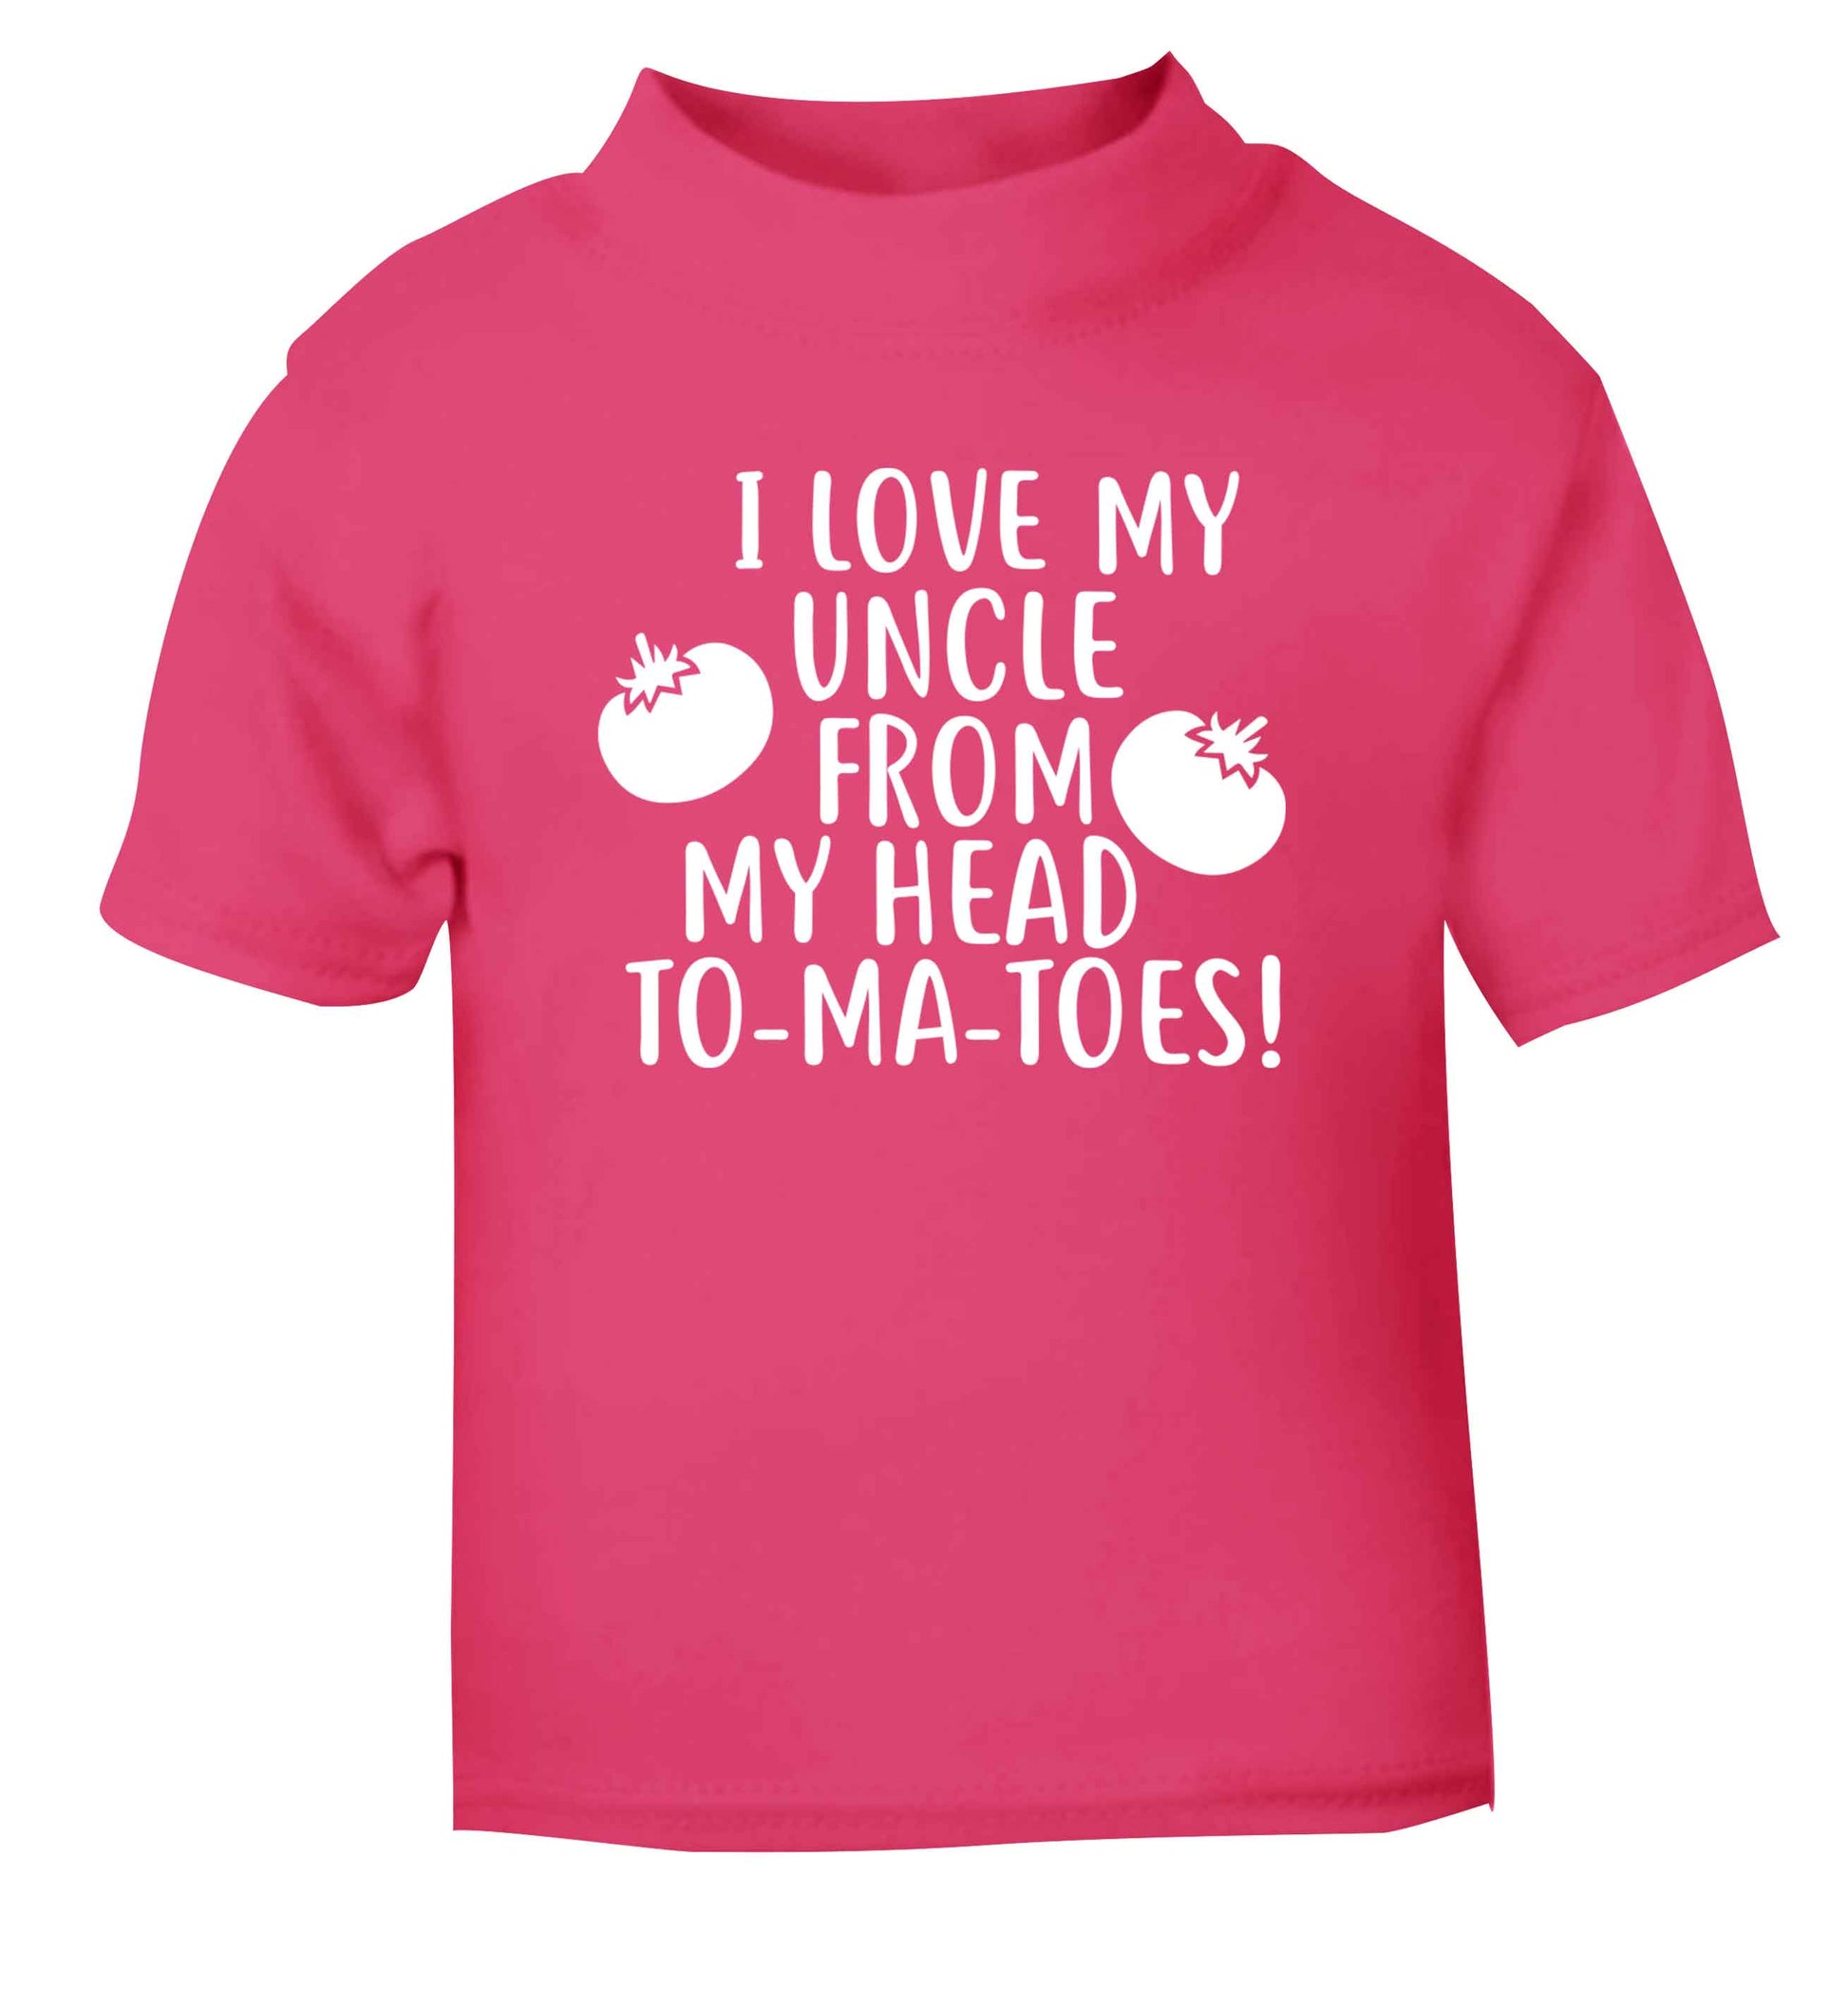 I love my uncle from my head To-Ma-Toes pink Baby Toddler Tshirt 2 Years